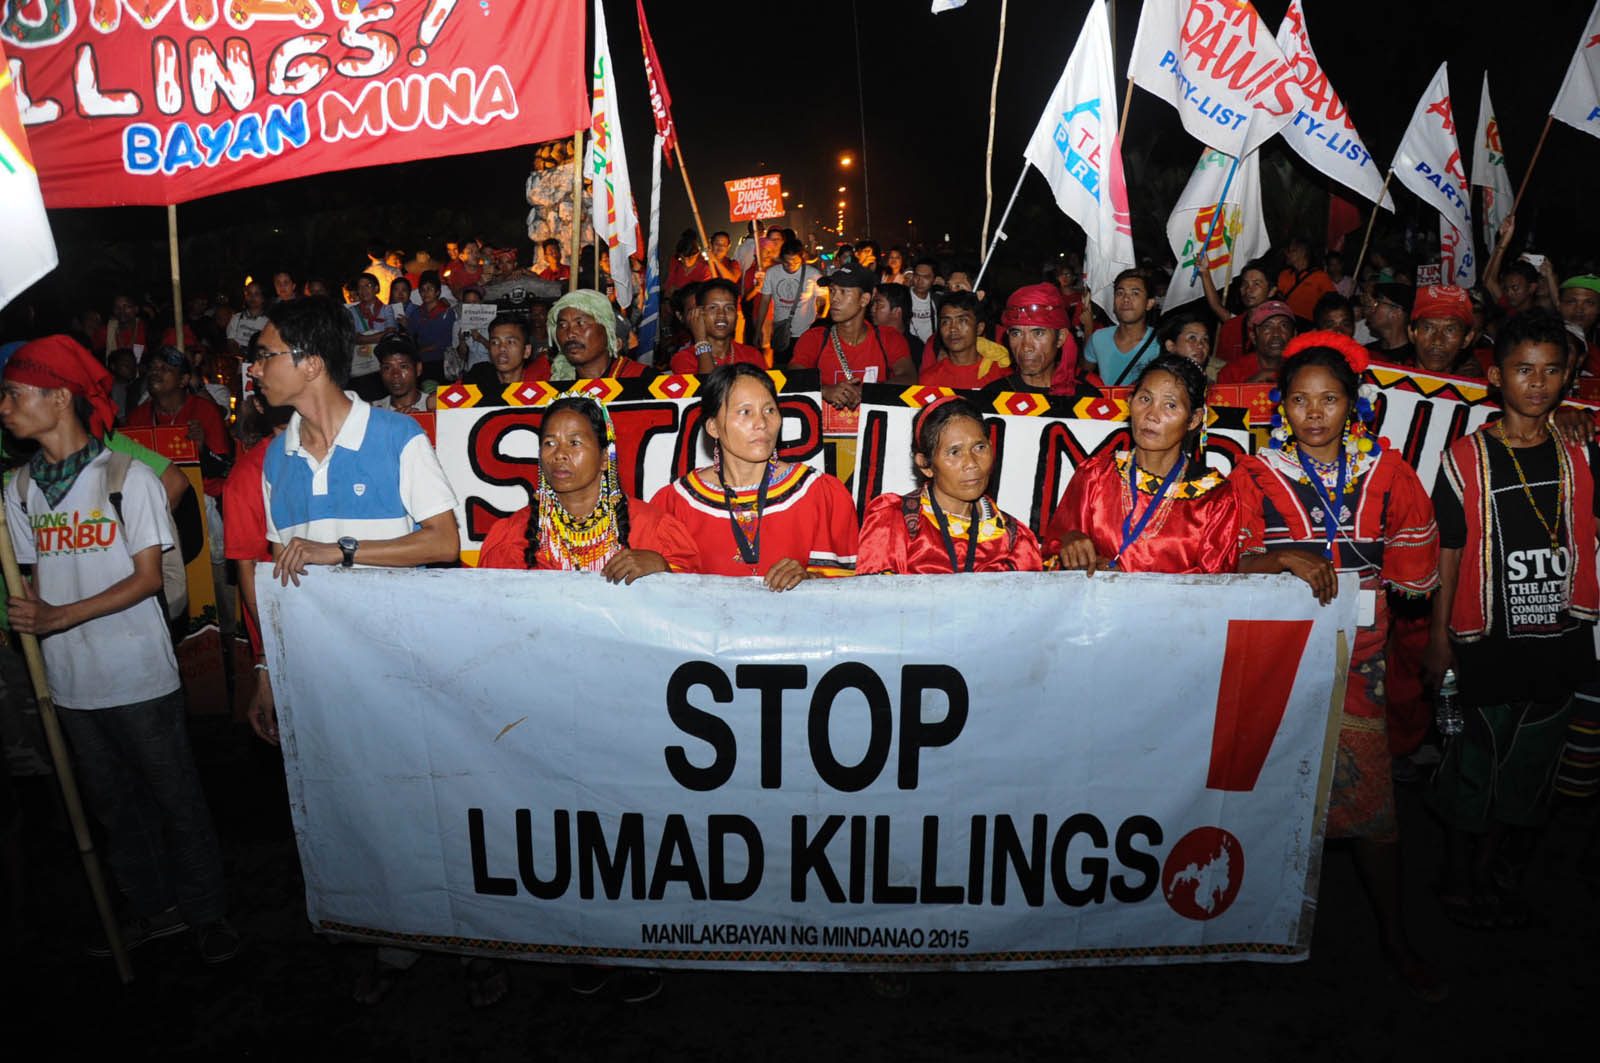 UN chief in PH: Use ‘strong’ laws to protect Lumad